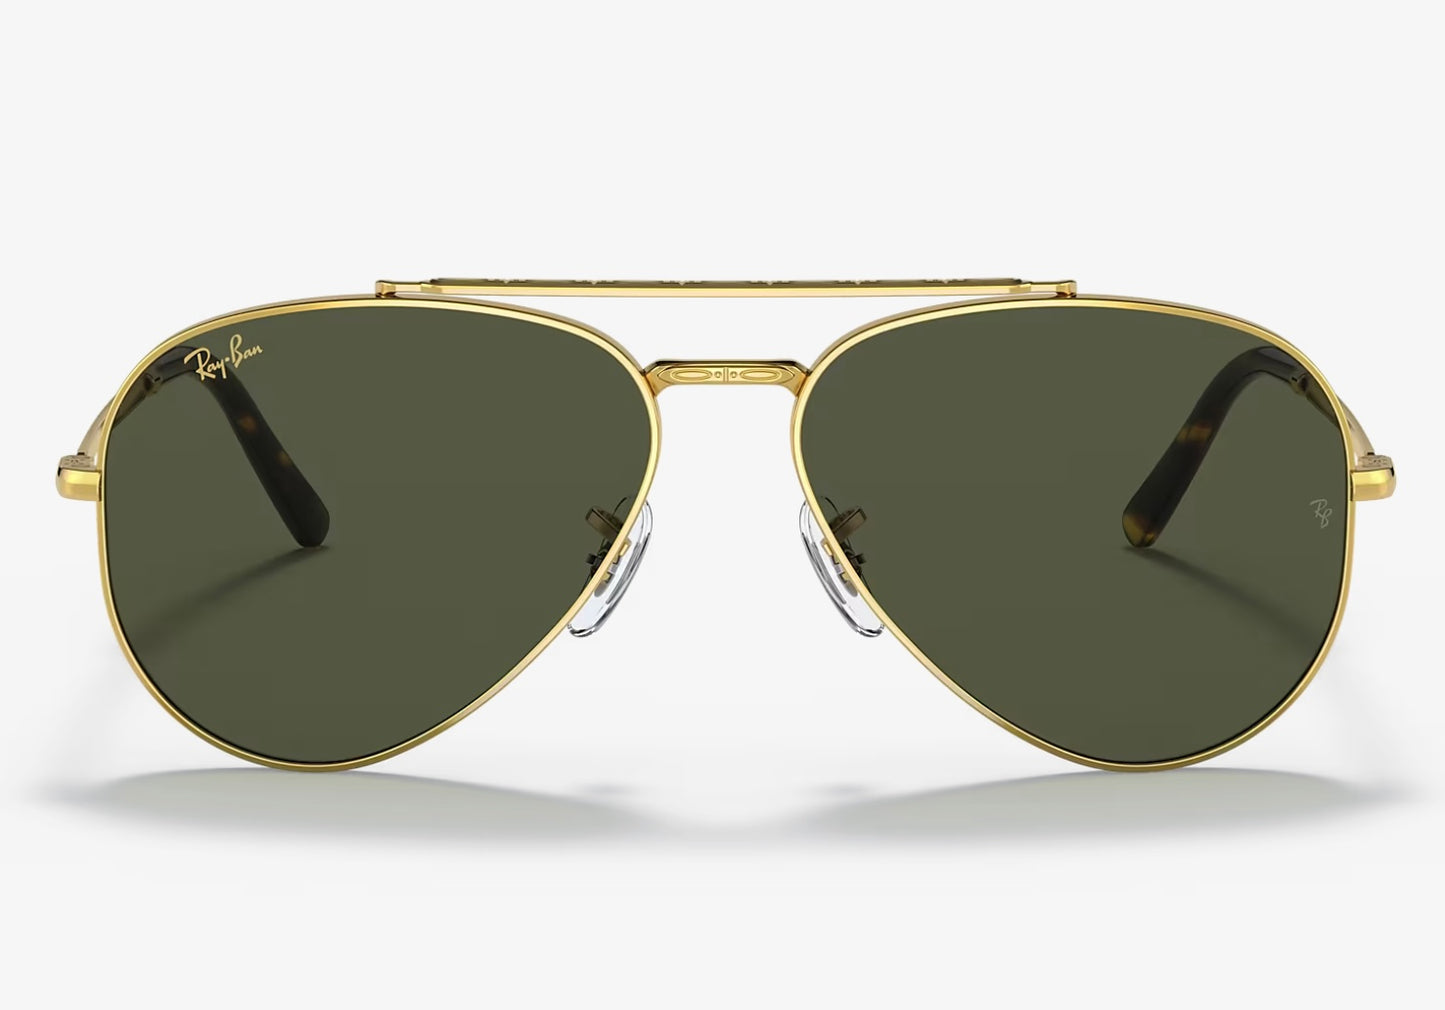 Ray-Ban New Aviator RB 3625 9196/31 58mm Gold Frame G15 Lens#N# – Shade ...